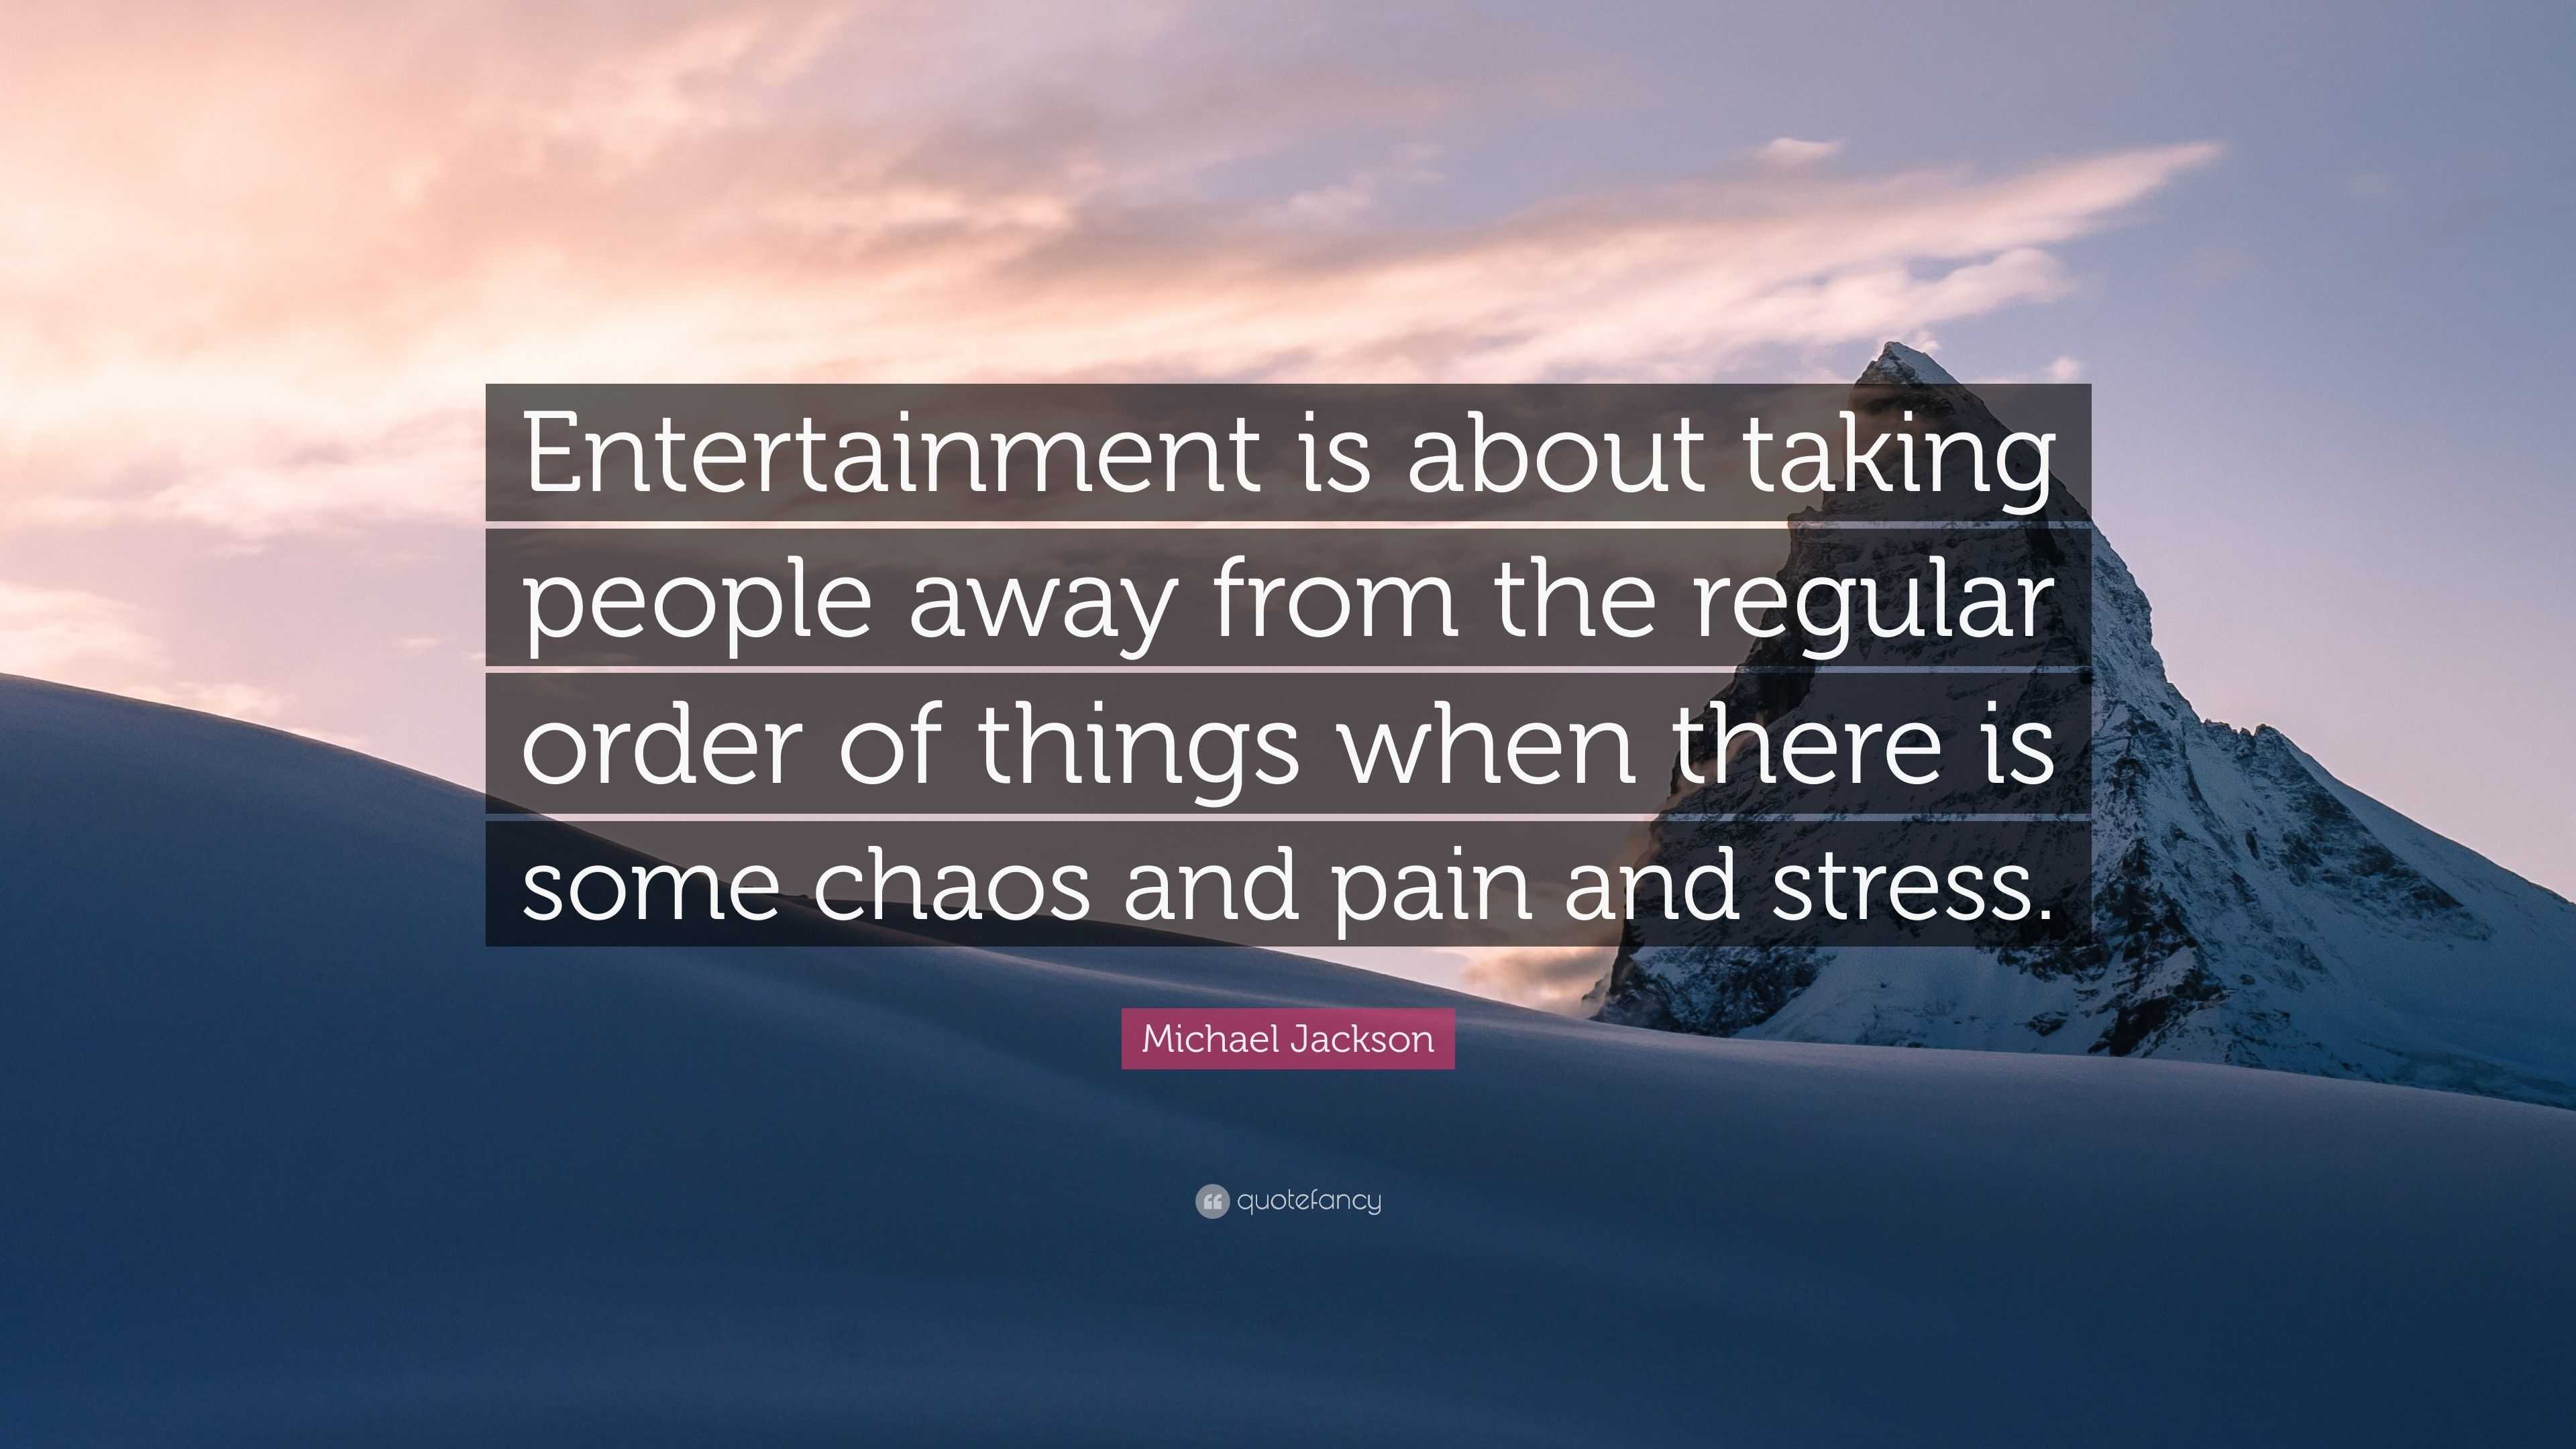 Michael Jackson Quote: “Entertainment is about taking people away from